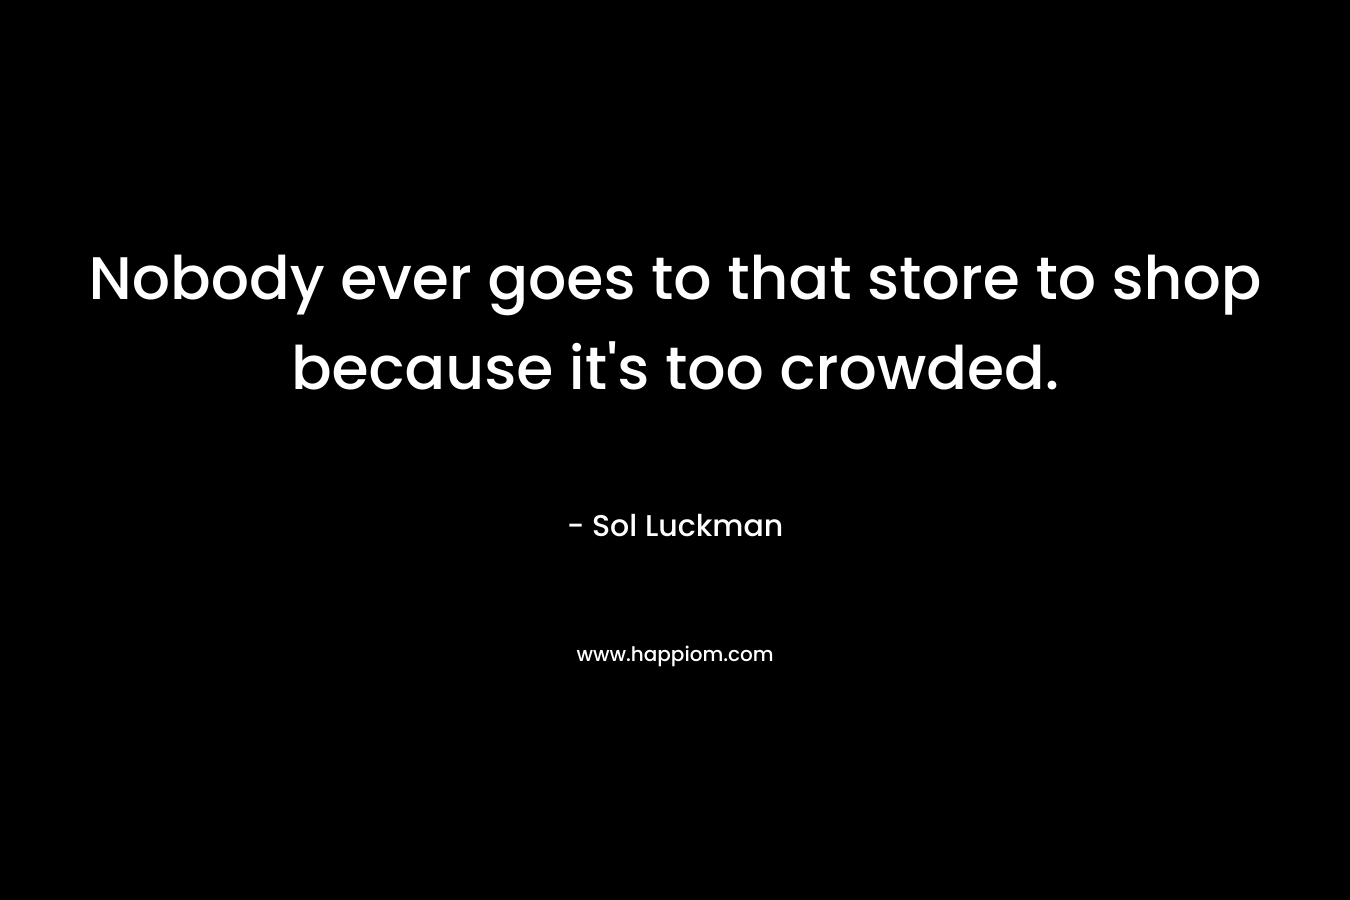 Nobody ever goes to that store to shop because it’s too crowded. – Sol Luckman